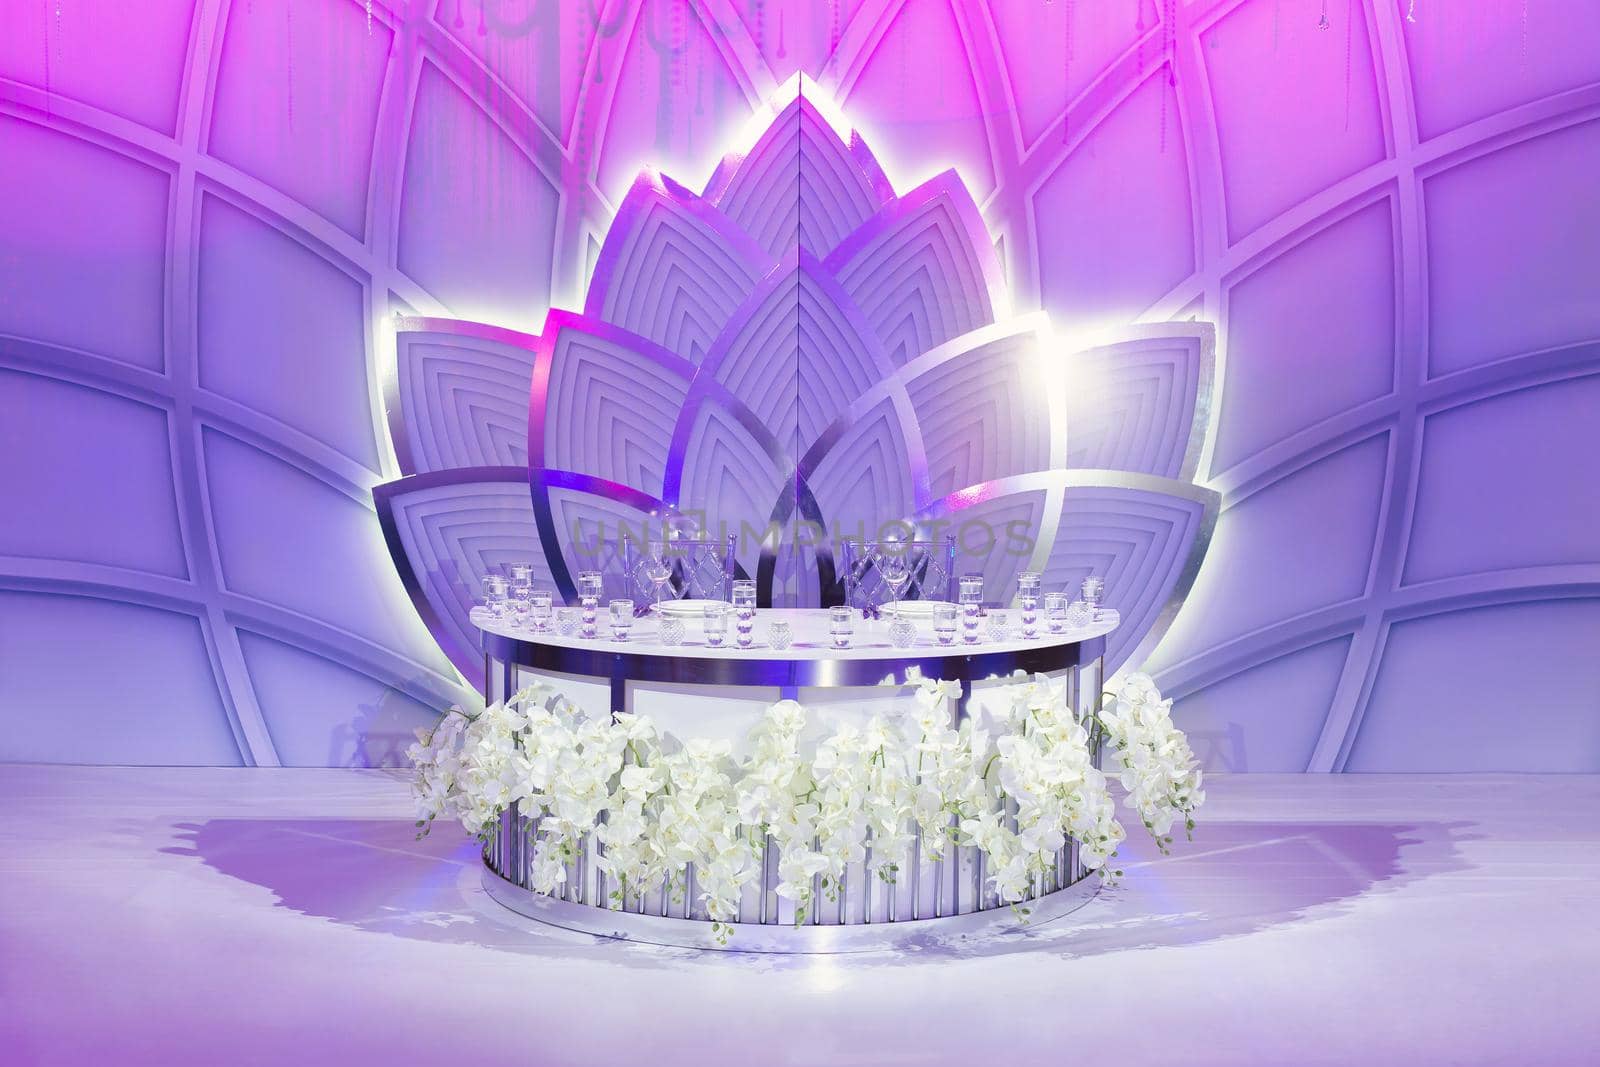 Luxurious wedding presidium in white with silver elements. Groom and bride 's table decorated with beautiful flowers